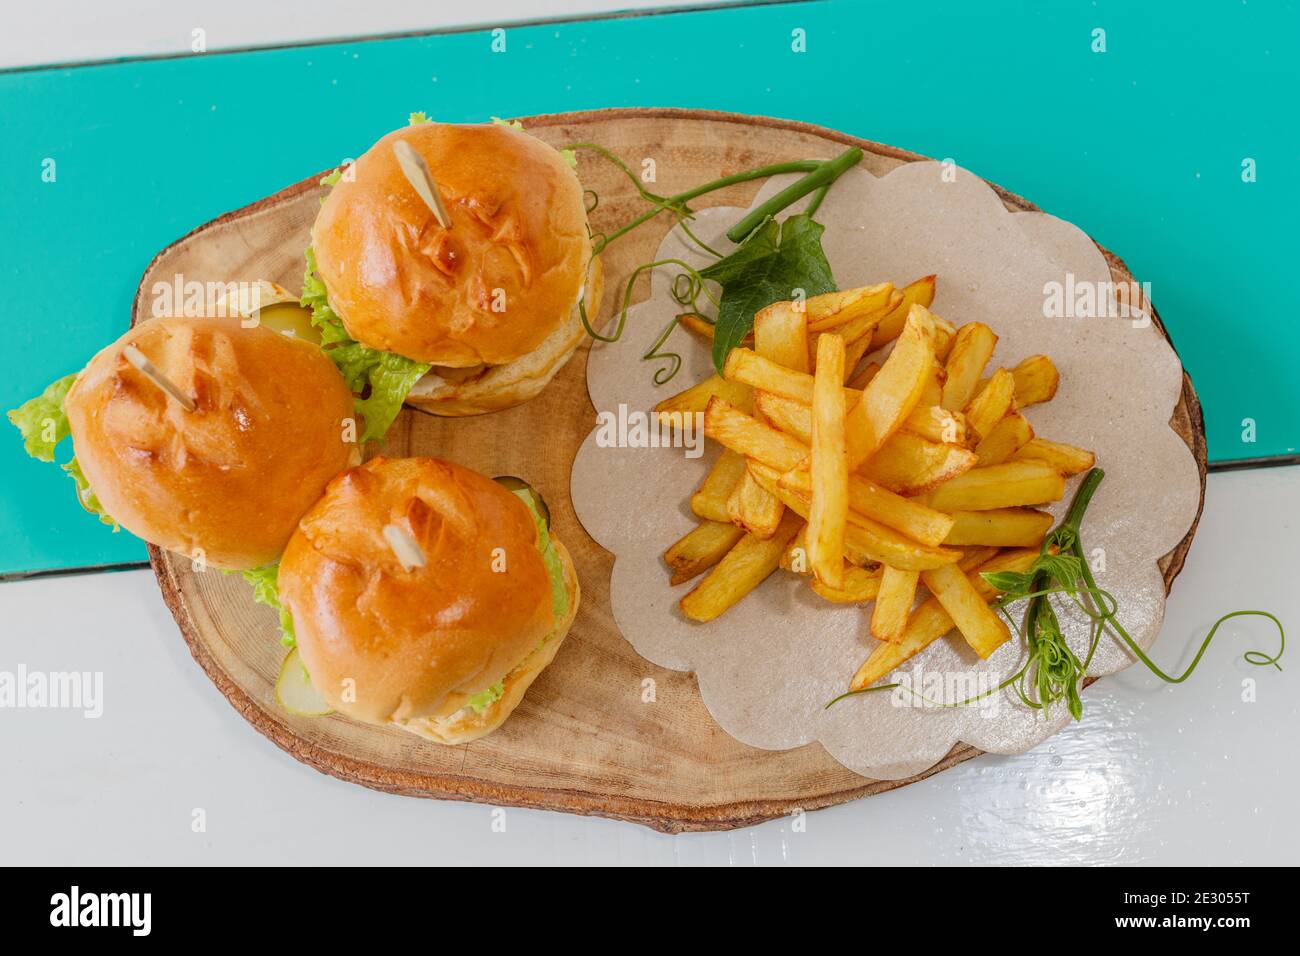 Three fish sliders (mini burgers) with lettuce, tomato and pickles, served with french fries on a wooden tray. Top view. Stock Photo